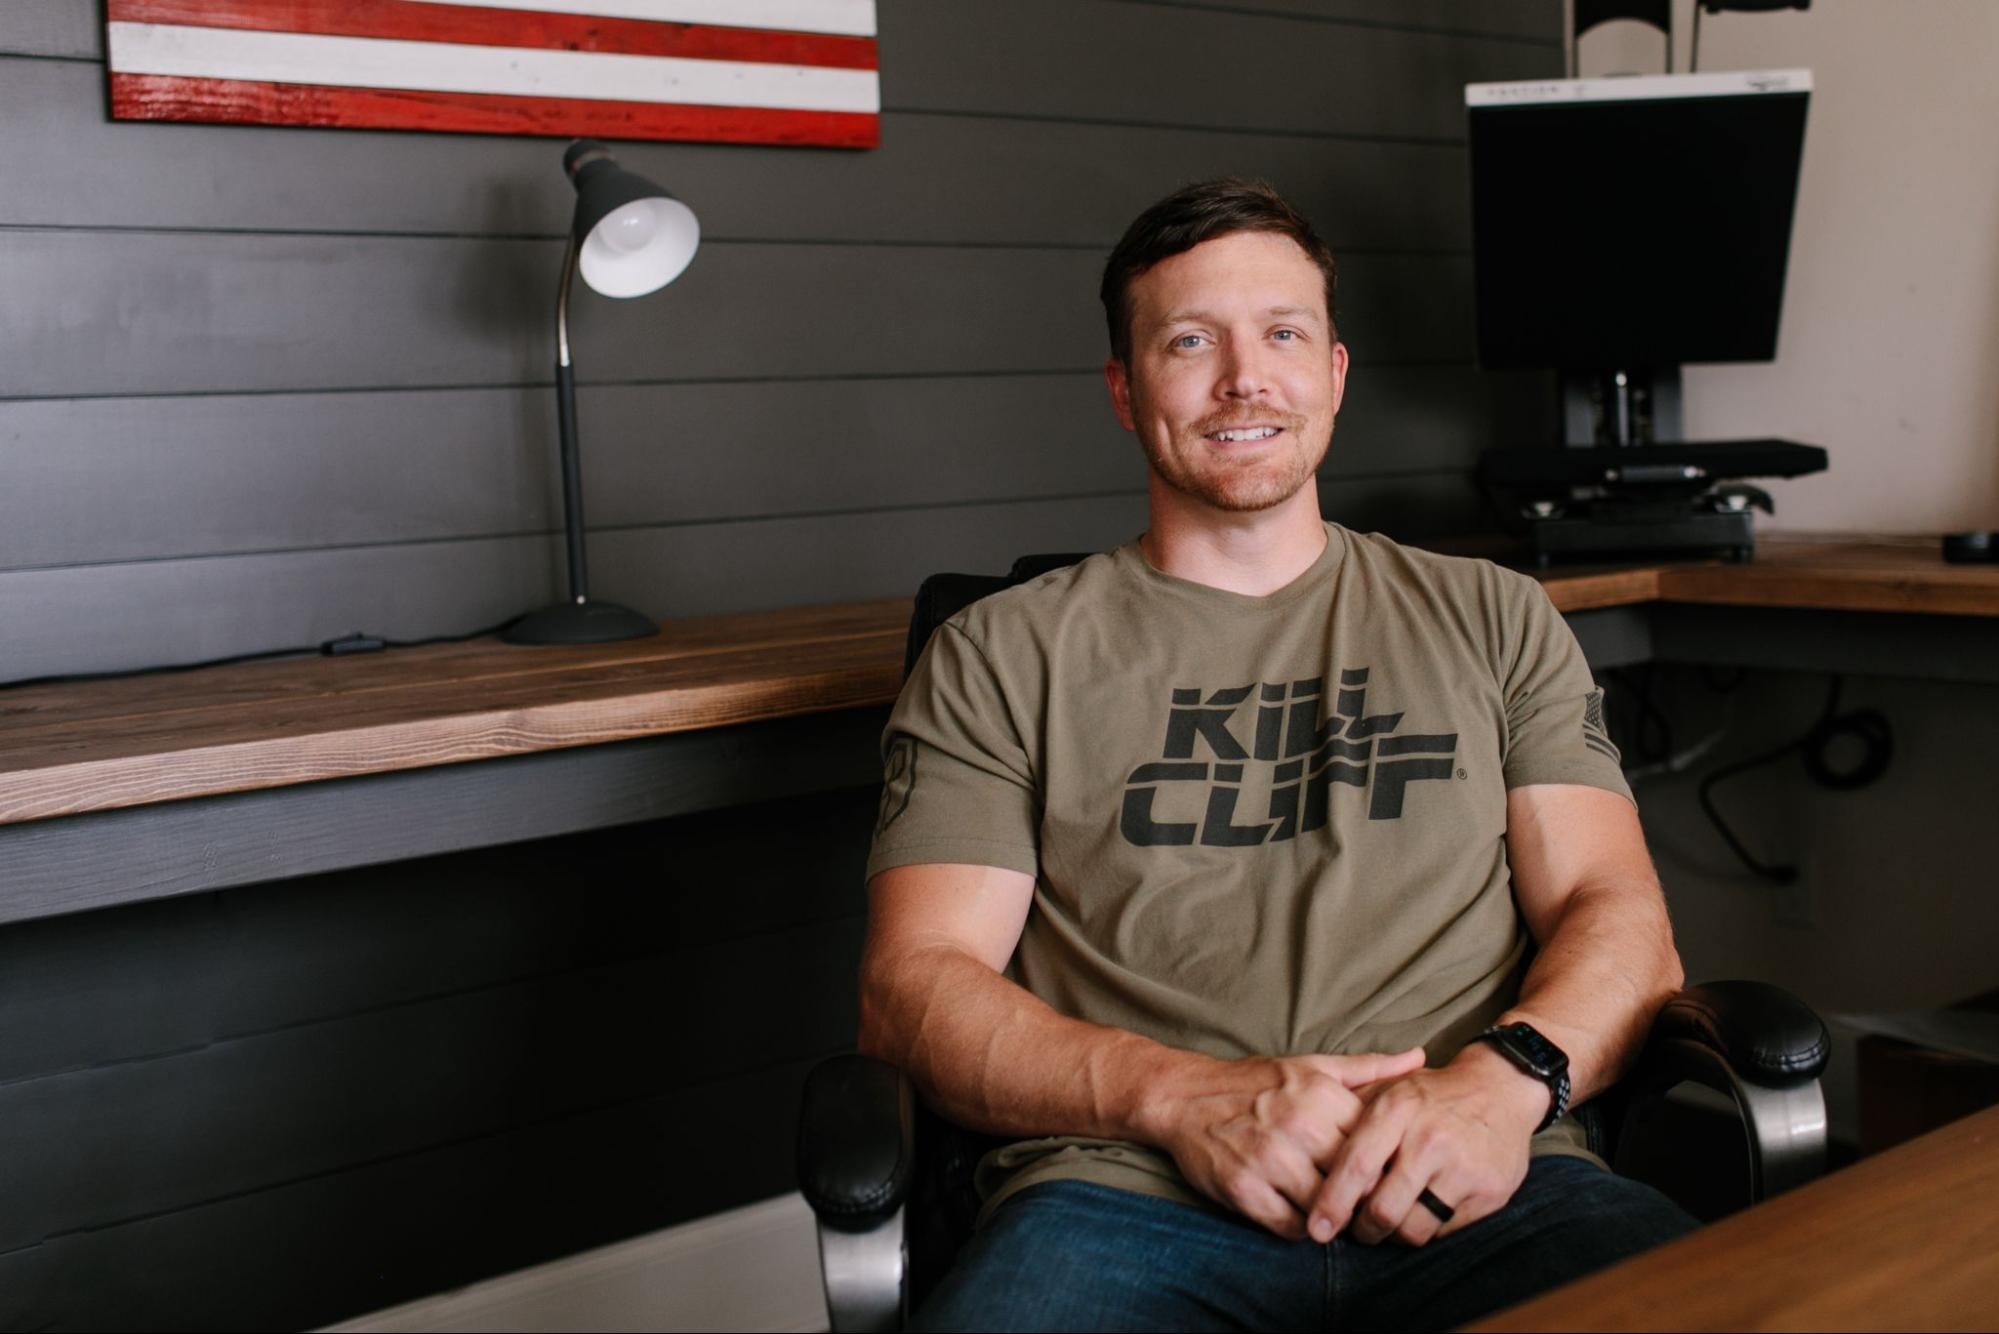 Ryan Roberts, the Director of Ecommerce at Kill Cliff sitting in an office setting.